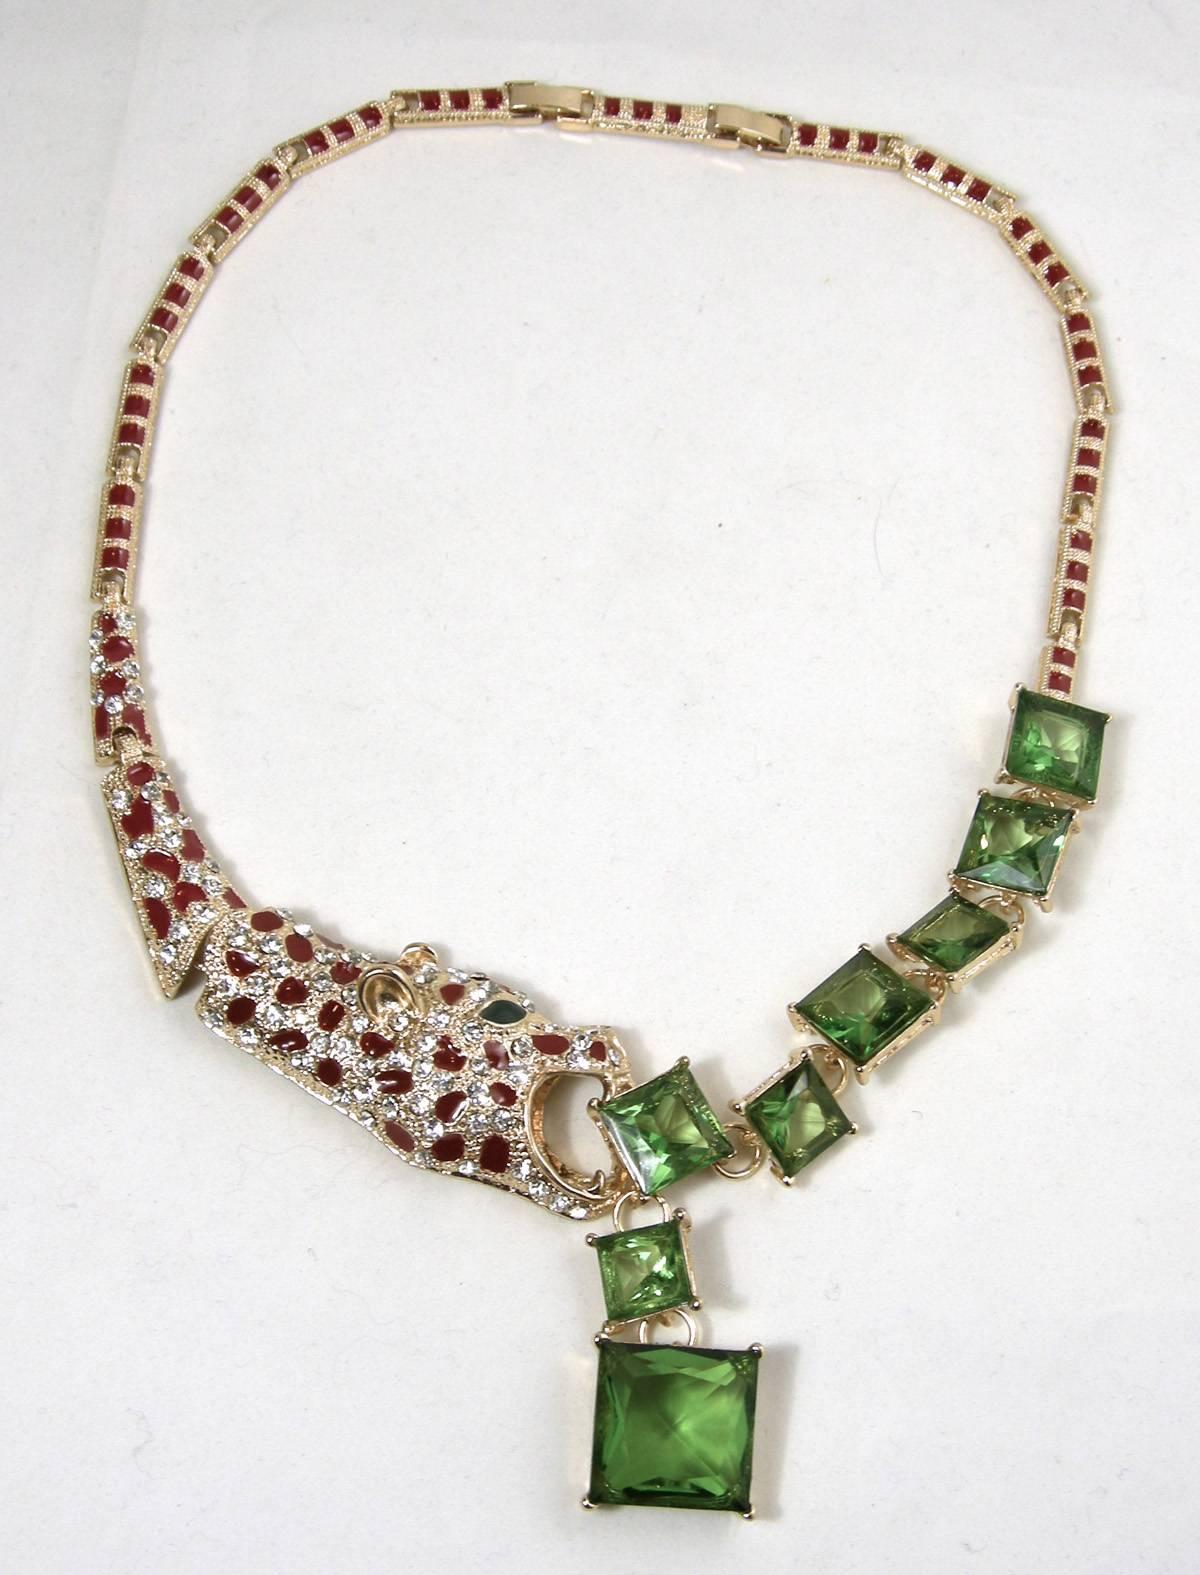 Ever see a leopard trying to eat green crystals? Well, here it is!  Made of with a gold tone base metal, the leopard’s mouth is open capturing green crystal squares. The links to this necklace has the leopard’s body is encrusted with rhinestones